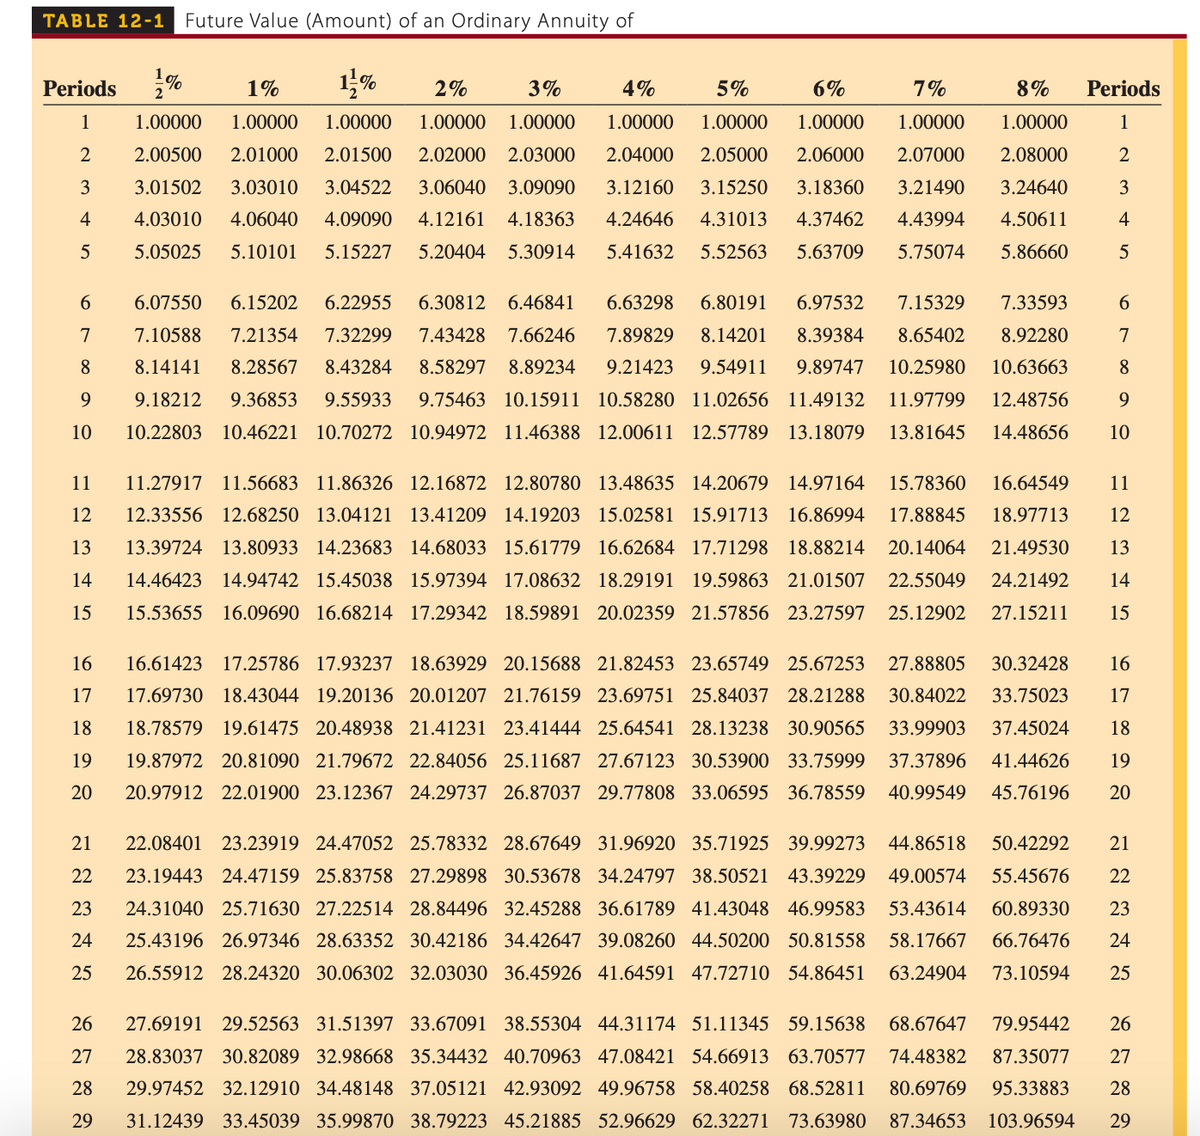 TABLE 12-1
Future Value (Amount) of an Ordinary Annuity of
Periods
1%
2%
3%
4%
5%
6%
7%
8%
Periods
1
1.00000
1.00000
1.00000
1.00000
1.00000
1.00000
1.00000
1.00000
1.00000
1.00000
1
2
2.00500
2.01000
2.01500
2.02000 2.03000
2.04000
2.05000
2.06000
2.07000
2.08000
2
3
3.01502
3.03010
3.04522
3.06040 3.09090
3.12160
3.15250
3.18360
3.21490
3.24640
3
4
4.03010
4.06040
4.09090
4.12161
4.18363
4.24646
4.31013
4.37462
4.43994
4.50611
4
5.05025
5.10101
5.15227
5.20404
5.30914
5.41632
5.52563
5.63709
5.75074
5.86660
5
6.
6.07550
6.15202
6.22955
6.30812 6.46841
6.63298
6.80191
6.97532
7.15329
7.33593
6
7
7.10588
7.21354
7.32299
7.43428
7.66246
7.89829
8.14201
8.39384
8.65402
8.92280
7
8
8.14141
8.28567
8.43284
8.58297
8.89234
9.21423
9.54911
9.89747
10.25980
10.63663
8
9.
9.18212
9.36853
9.55933
9.75463 10.15911 10.58280 11.02656 11.49132
11.97799
12.48756
9.
10
10.22803 10.46221 10.70272 10.94972 11.46388 12.00611 12.57789 13.18079
13.81645
14.48656
10
11
11.27917
11.56683 11.86326 12.16872 12.80780 13.48635 14.20679 14.97164
15.78360
16.64549
11
12
12.33556 12.68250 13.04121 13.41209 14.19203 15.02581 15.91713 16.86994
17.88845
18.97713
12
13
13.39724 13.80933 14.23683 14.68033 15.61779 16.62684 17.71298 18.88214
20.14064
21.49530
13
14
14.46423
14.94742 15.45038 15.97394 17.08632 18.29191 19.59863 21.01507
22.55049
24.21492
14
15
15.53655 16.09690 16.68214 17.29342 18.59891 20.02359 21.57856 23.27597
25.12902
27.15211
15
16
16.61423 17.25786 17.93237 18.63929 20.15688 21.82453 23.65749 25.67253
27.88805
30.32428
16
17
17.69730 18.43044 19.20136 20.01207 21.76159 23.69751 25.84037 28.21288
30.84022
33.75023
17
18
18.78579
19.61475 20.48938 21.41231 23.41444 25.64541 28.13238 30.90565
33.99903
37.45024
18
19
19.87972 20.81090 21.79672 22.84056 25.11687 27.67123 30.53900 33.75999
37.37896
41.44626
19
20.97912 22.01900 23.12367 24.29737 26.87037 29.77808 33.06595 36.78559
40.99549
45.76196
20
21
22.08401 23.23919 24.47052 25.78332 28.67649 31.96920 35.71925 39.99273
44.86518
50.42292
21
22
23.19443 24.47159 25.83758 27.29898 30.53678 34.24797 38.50521 43.39229
49.00574
55.45676
22
23
24.31040 25.71630 27.22514 28.84496 32.45288 36.61789 41.43048 46.99583
53.43614
60.89330
23
24
25.43196 26.97346 28.63352 30.42186 34.42647 39.08260 44.50200 50.81558
58.17667
66.76476
24
25
26.55912 28.24320 30.06302 32.03030 36.45926 41.64591 47.72710 54.86451
63.24904
73.10594
25
26
27.69191 29.52563 31.51397 33.67091 38.55304 44.31174 51.11345 59.15638
68.67647
79.95442
26
27
28.83037 30.82089 32.98668 35.34432 40.70963 47.08421 54.66913 63.70577
74.48382
87.35077
27
28
29.97452 32.12910 34.48148 37.05121 42.93092 49.96758 58.40258 68.52811
80.69769
95.33883
28
29
31.12439 33.45039 35.99870 38.79223 45.21885 52.96629 62.32271 73.63980
87.34653
103.96594
29
20
